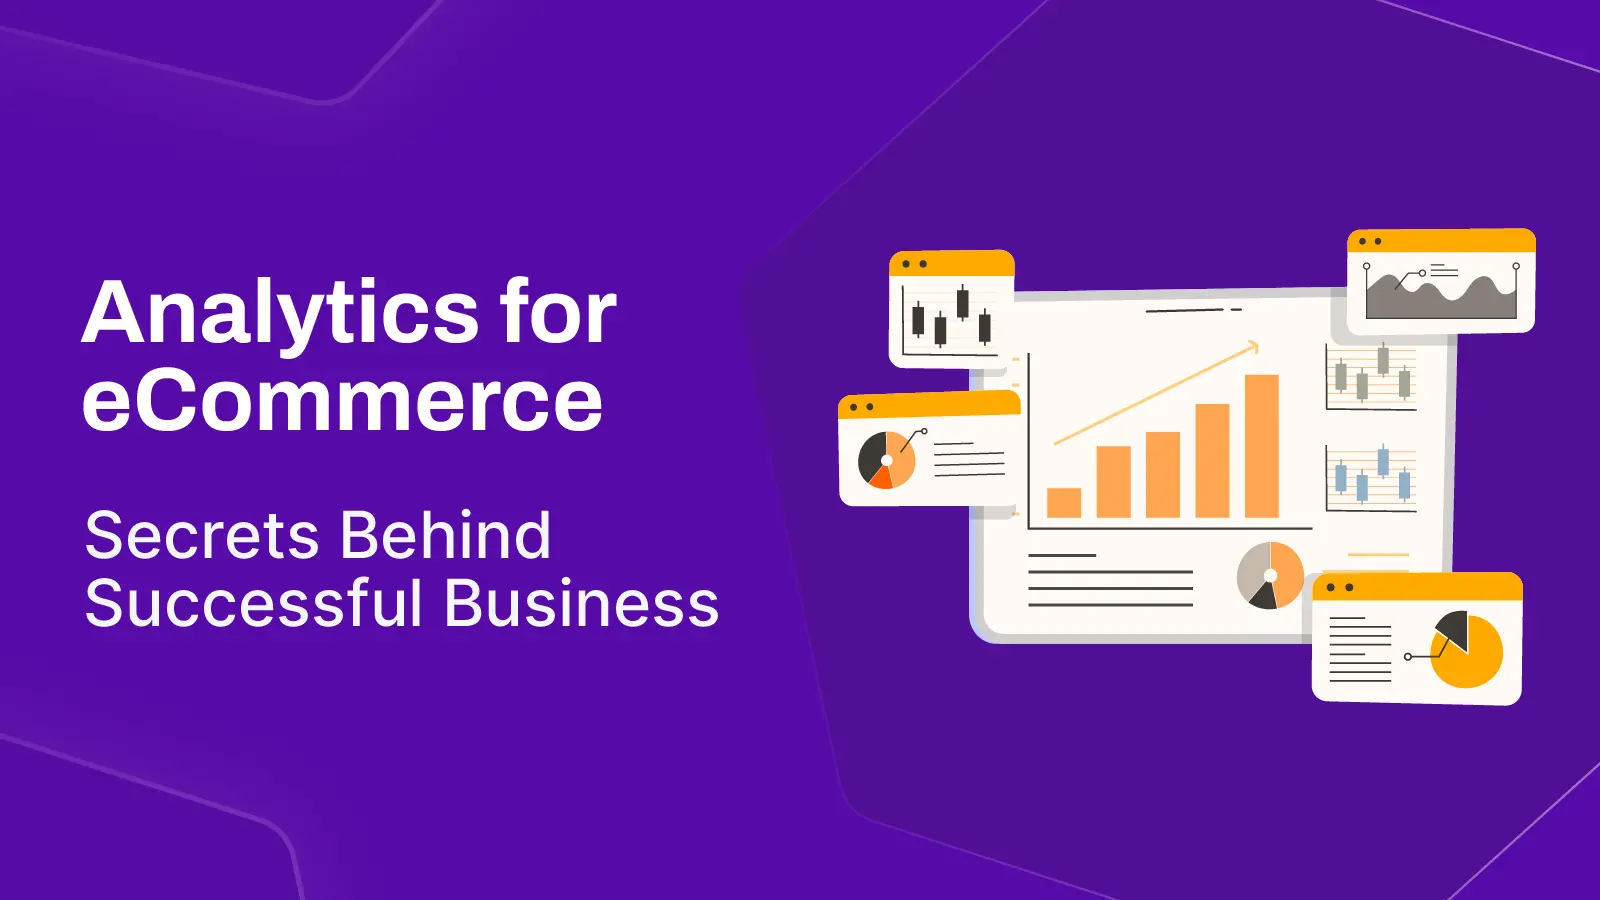 Analytics for eCommerce: Secrets Behind Successful Business